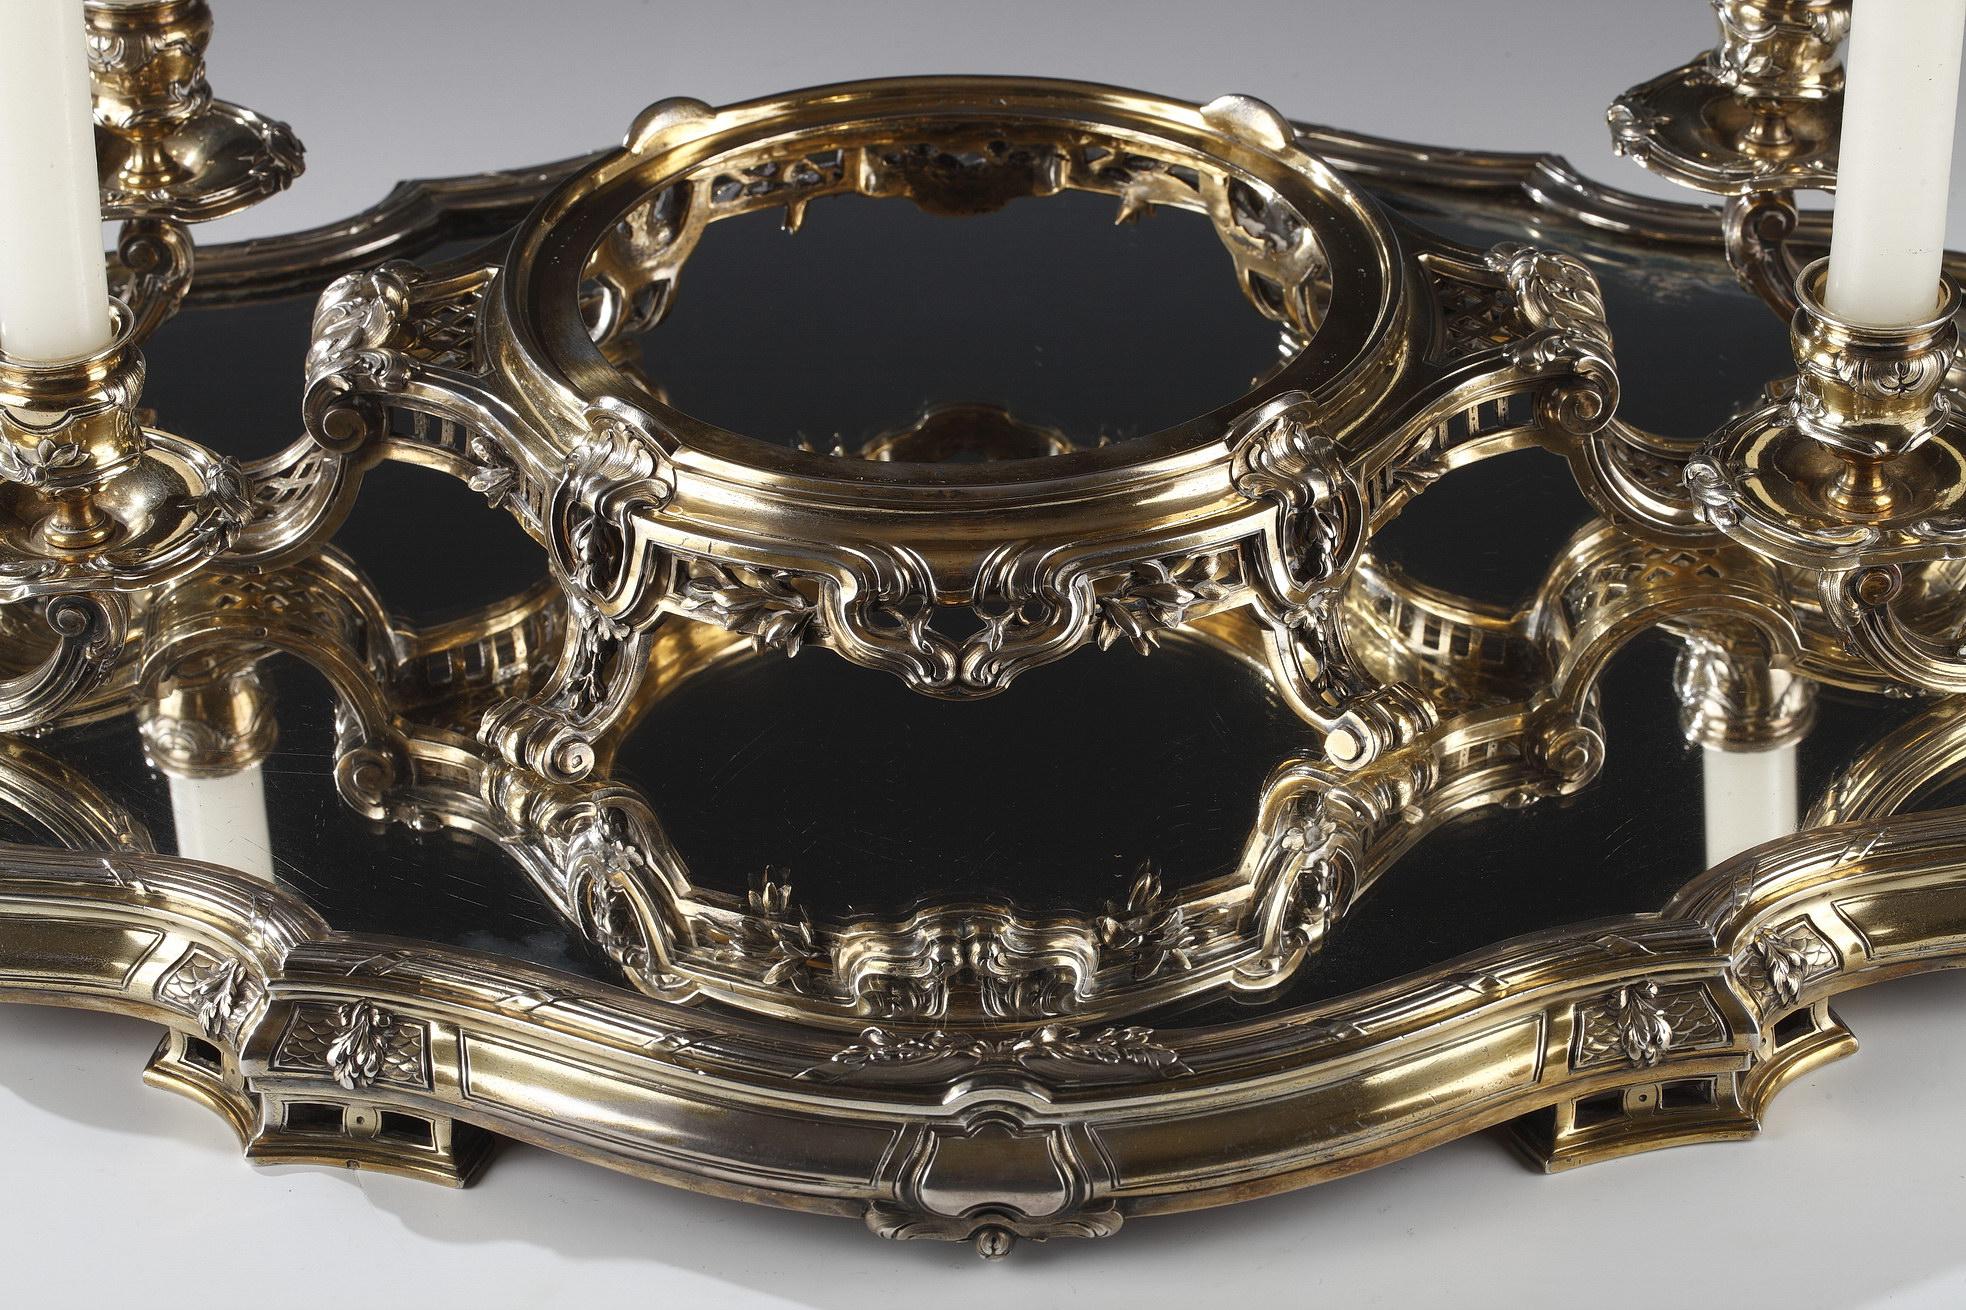 Silvered Charming Silver-Gilt Centerpiece by Boin-Taburet, France, Circa 1880 For Sale